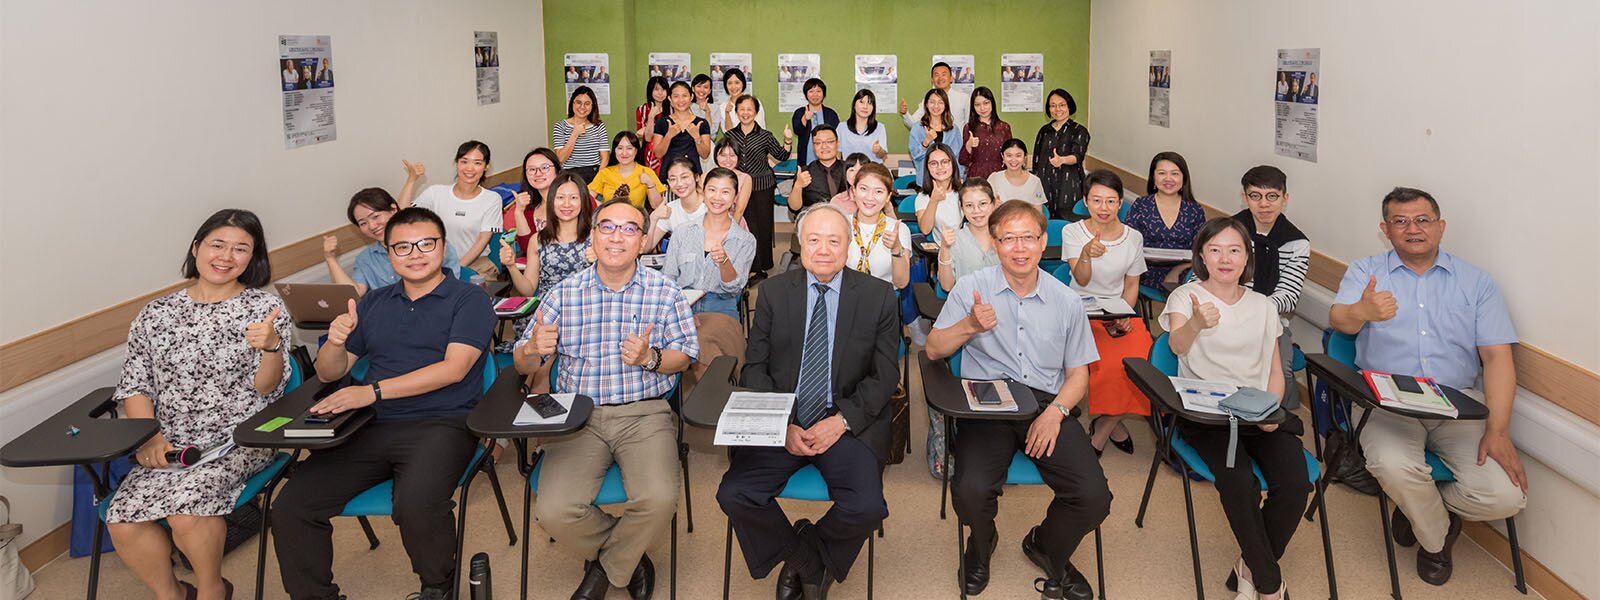 EdUHK Organises Advanced Workshop on IB Concepts and Teaching Chinese as a Second Language